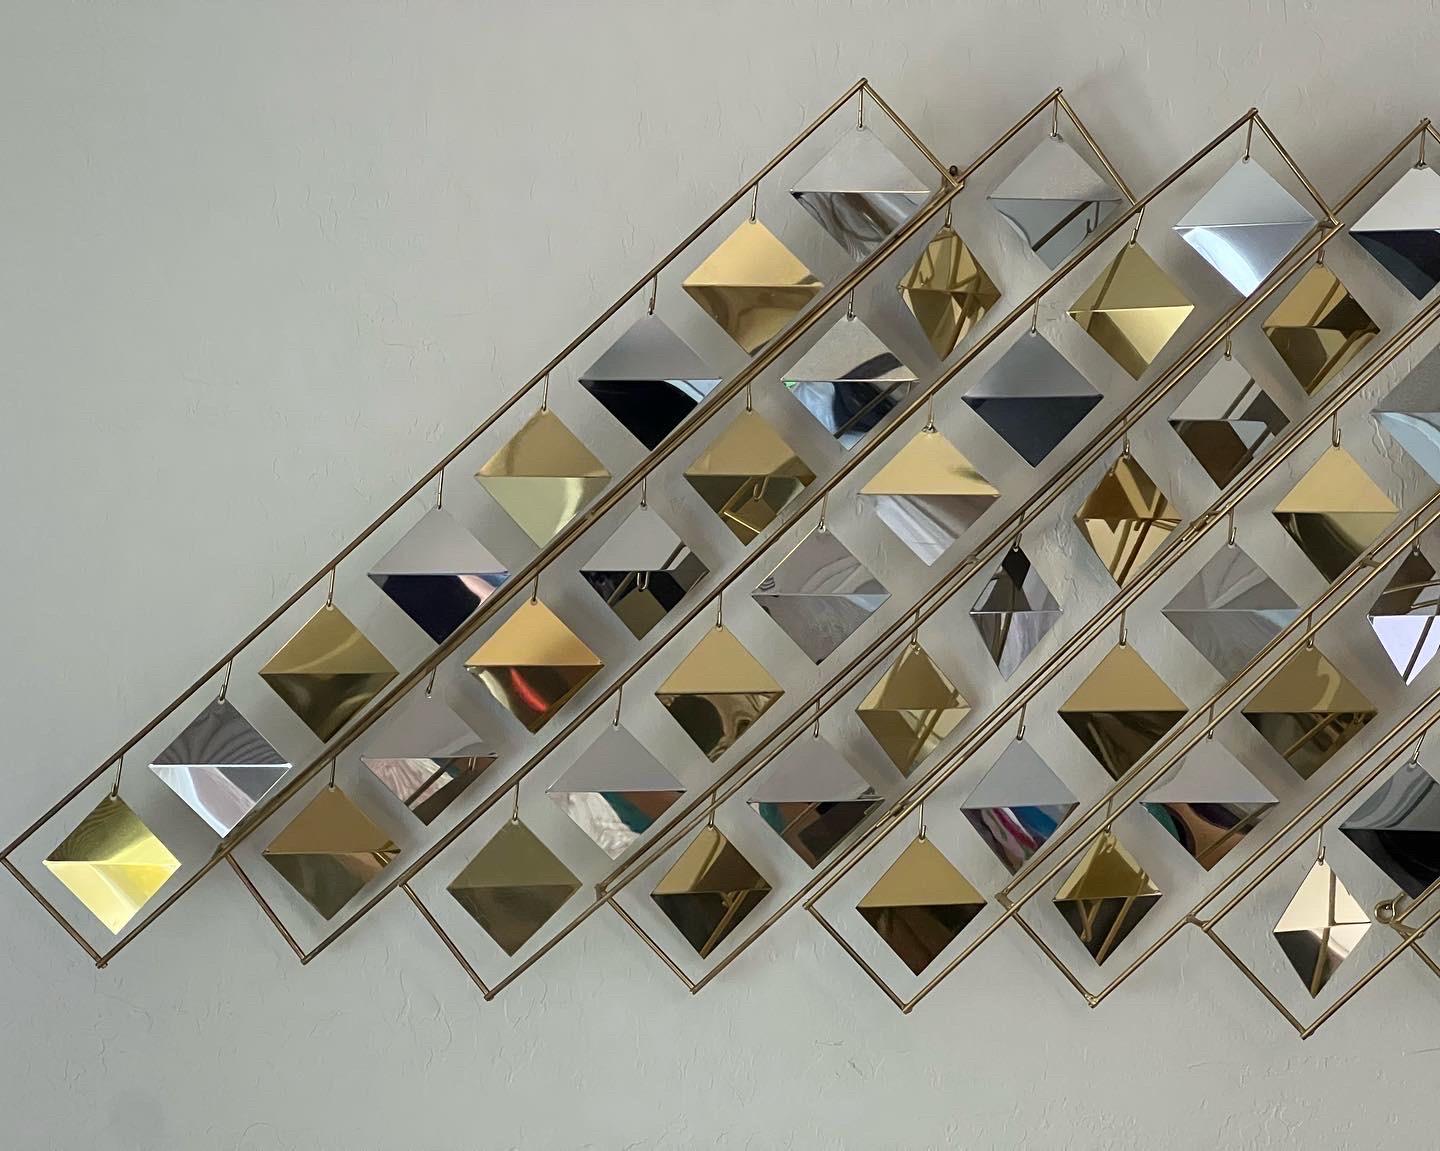 C. Jeré uncommon kinetic brass and chrome wall sculpture. It’s made of a brass frame with two separate parts that connect or can be displayed separately. It can also be positioned offset (not pictured). Polished brass and chrome bent diamonds hang